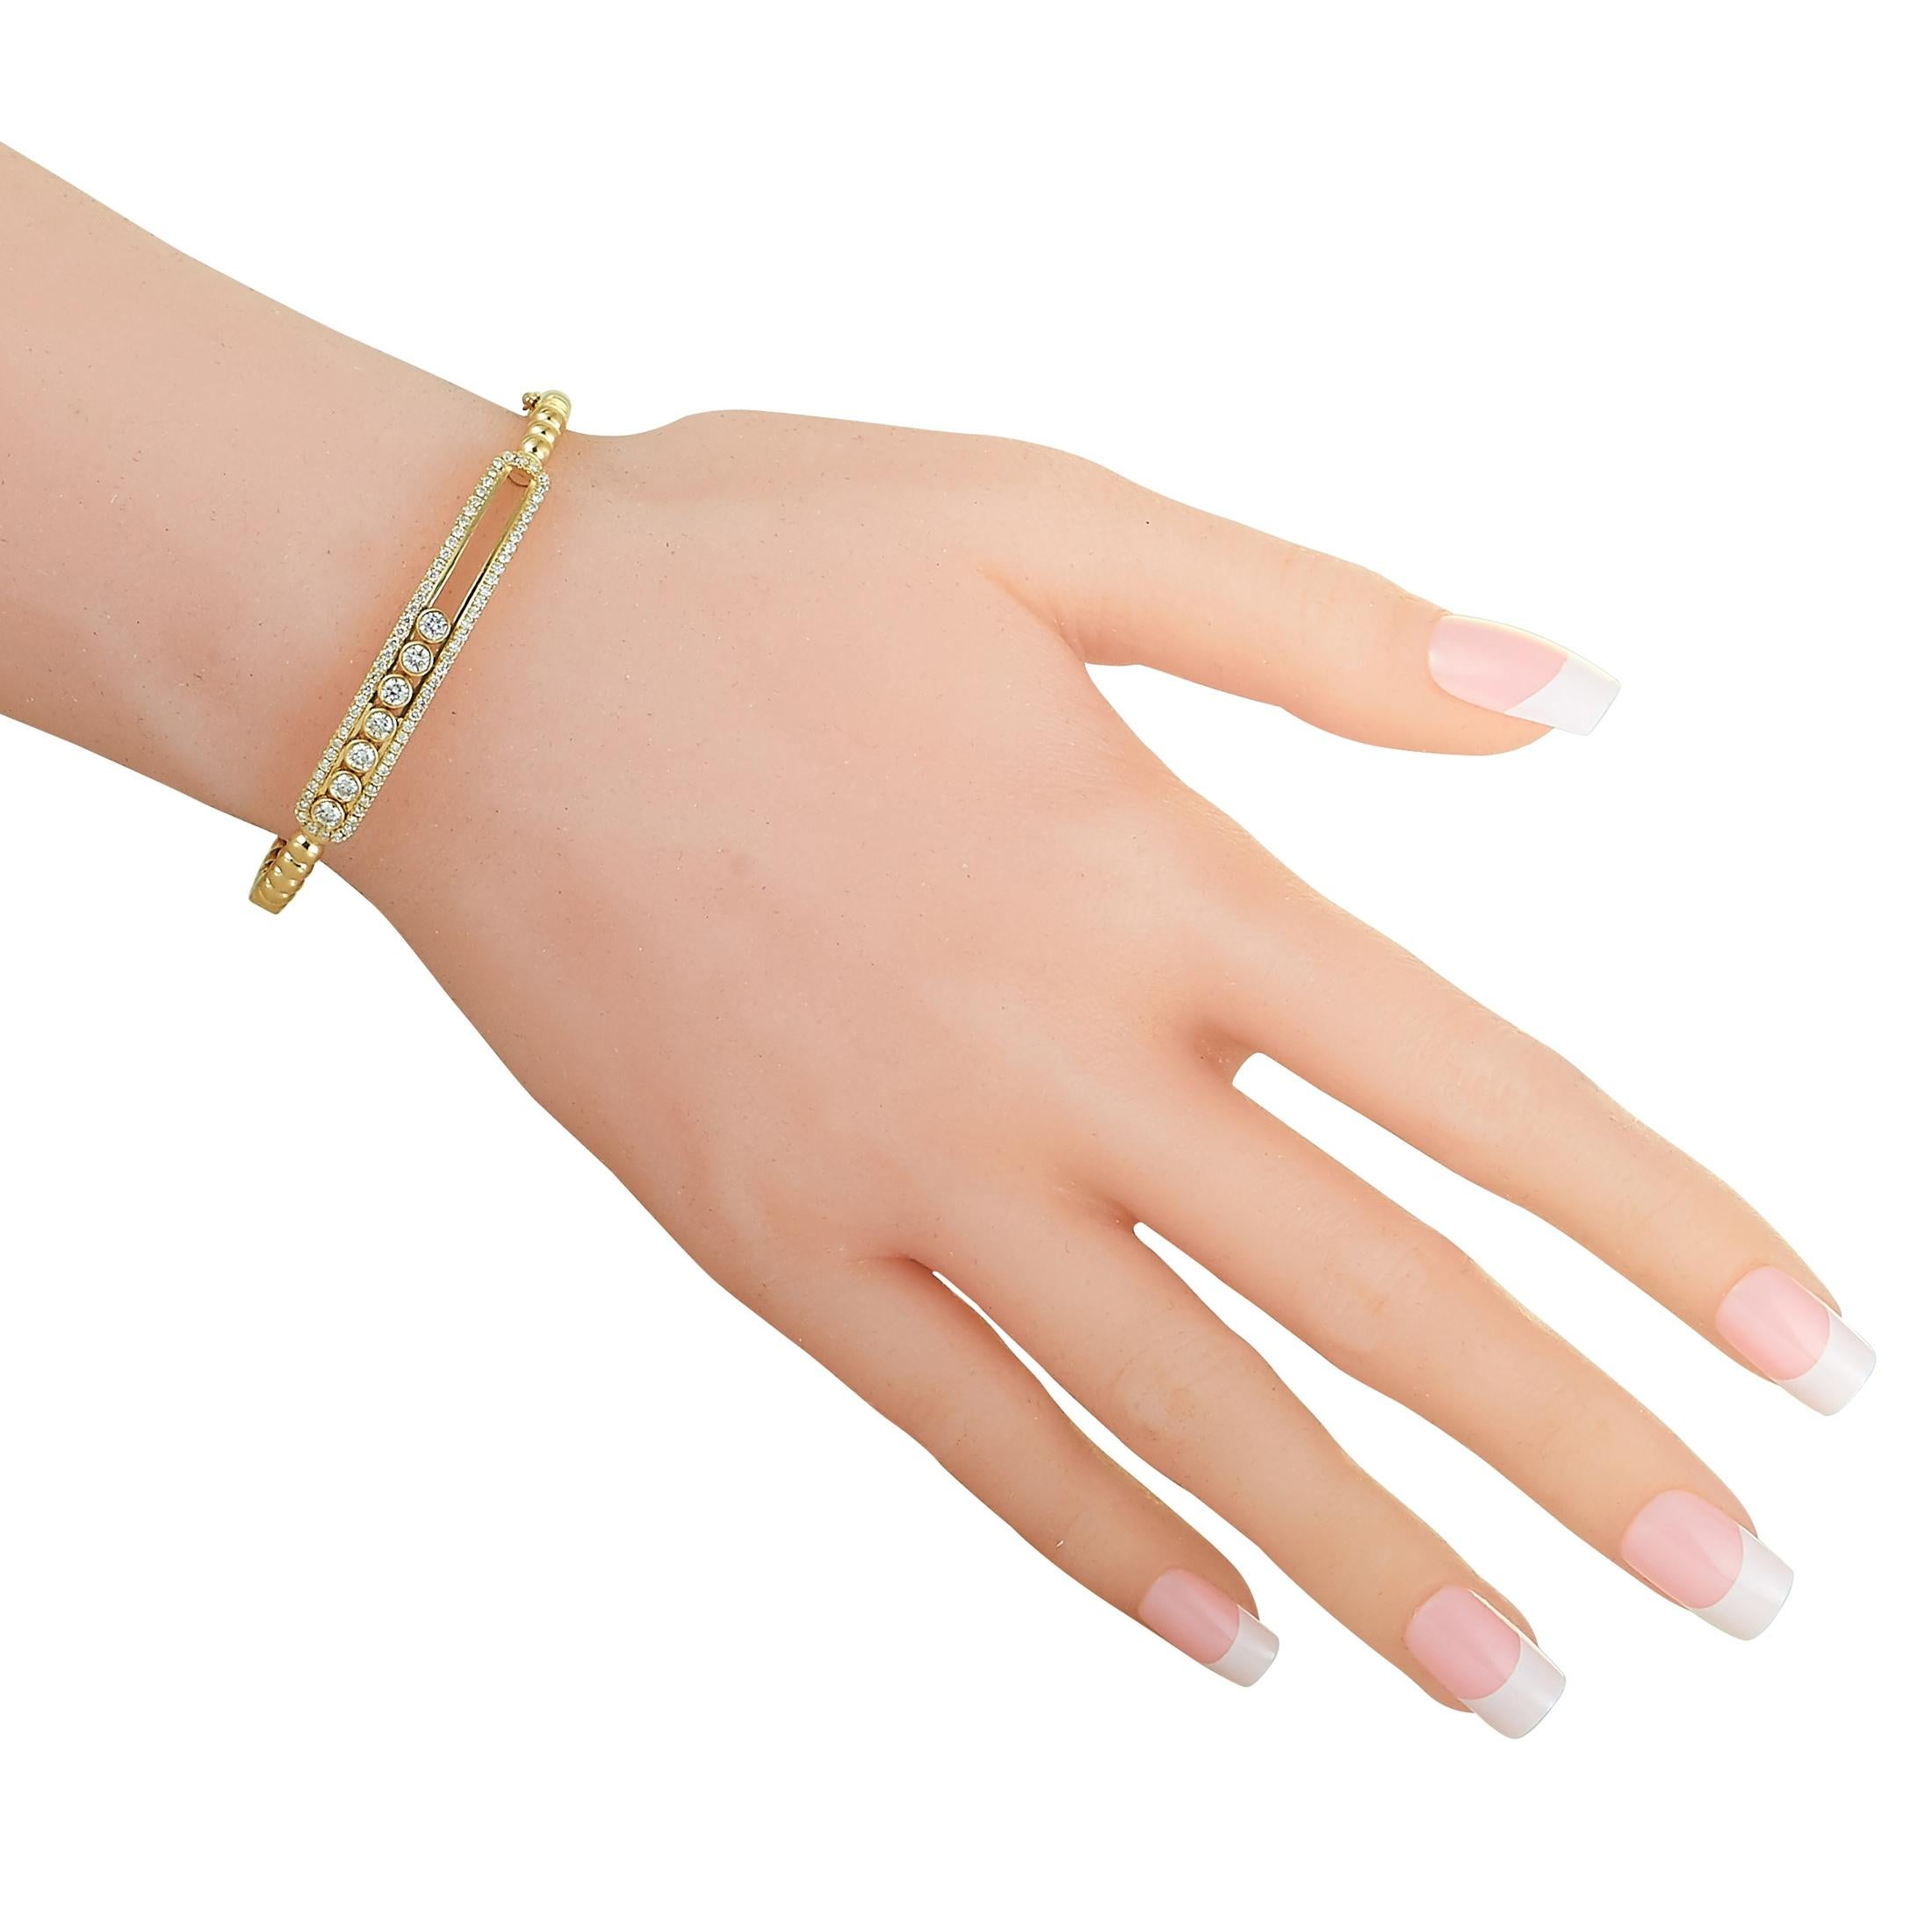 This LB Exclusive bangle bracelet is made out of 18K yellow gold and diamonds that total 1.20 carats. The bracelet weighs 13.8 grams and measures 7” in length.

Offered in brand new condition, this item includes a gift box.